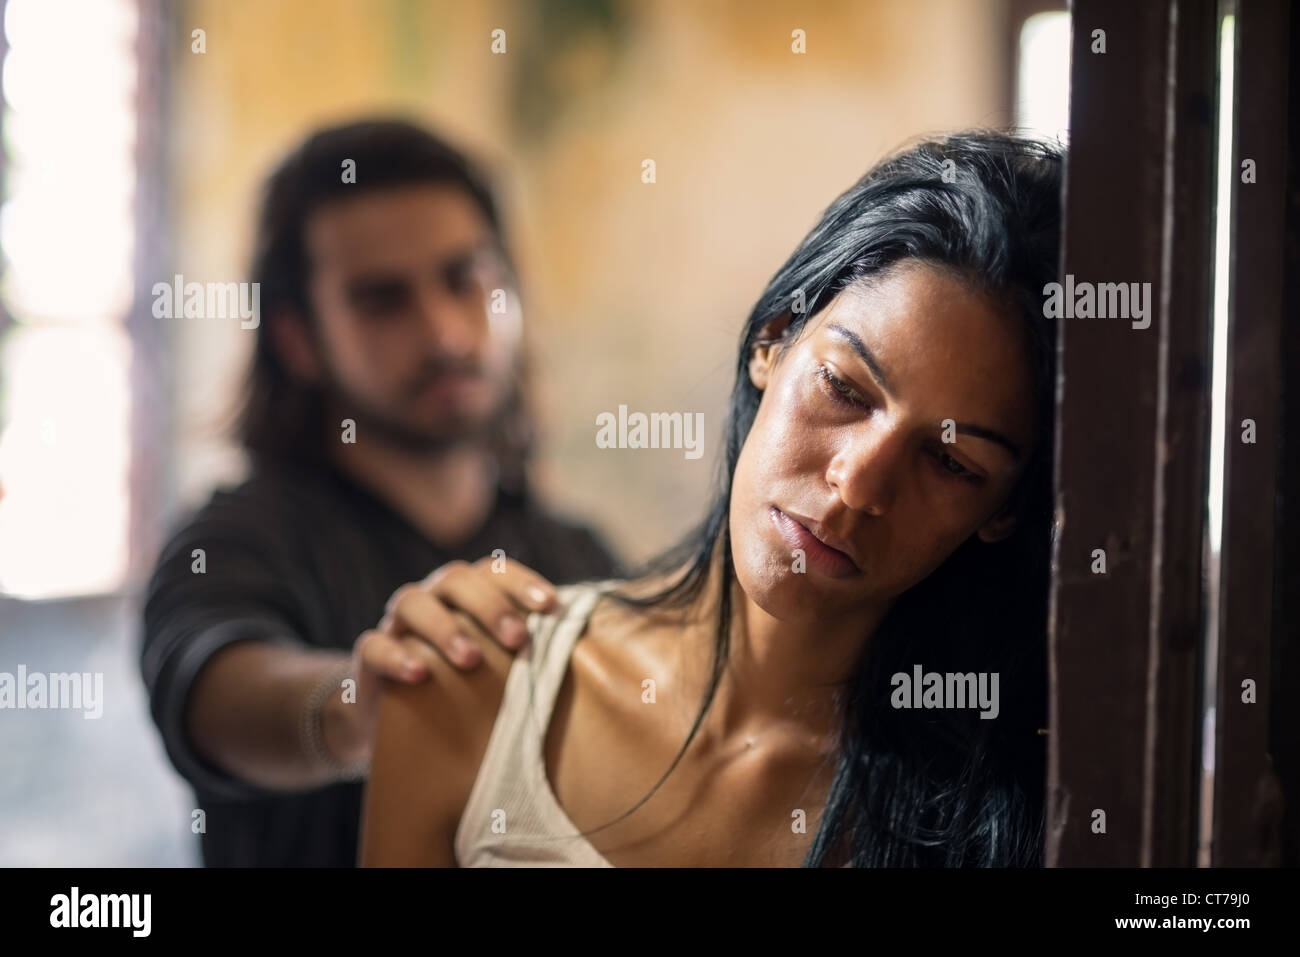 Social issues, domestic violence with young husband trying to reconcile with abused wife Stock Photo